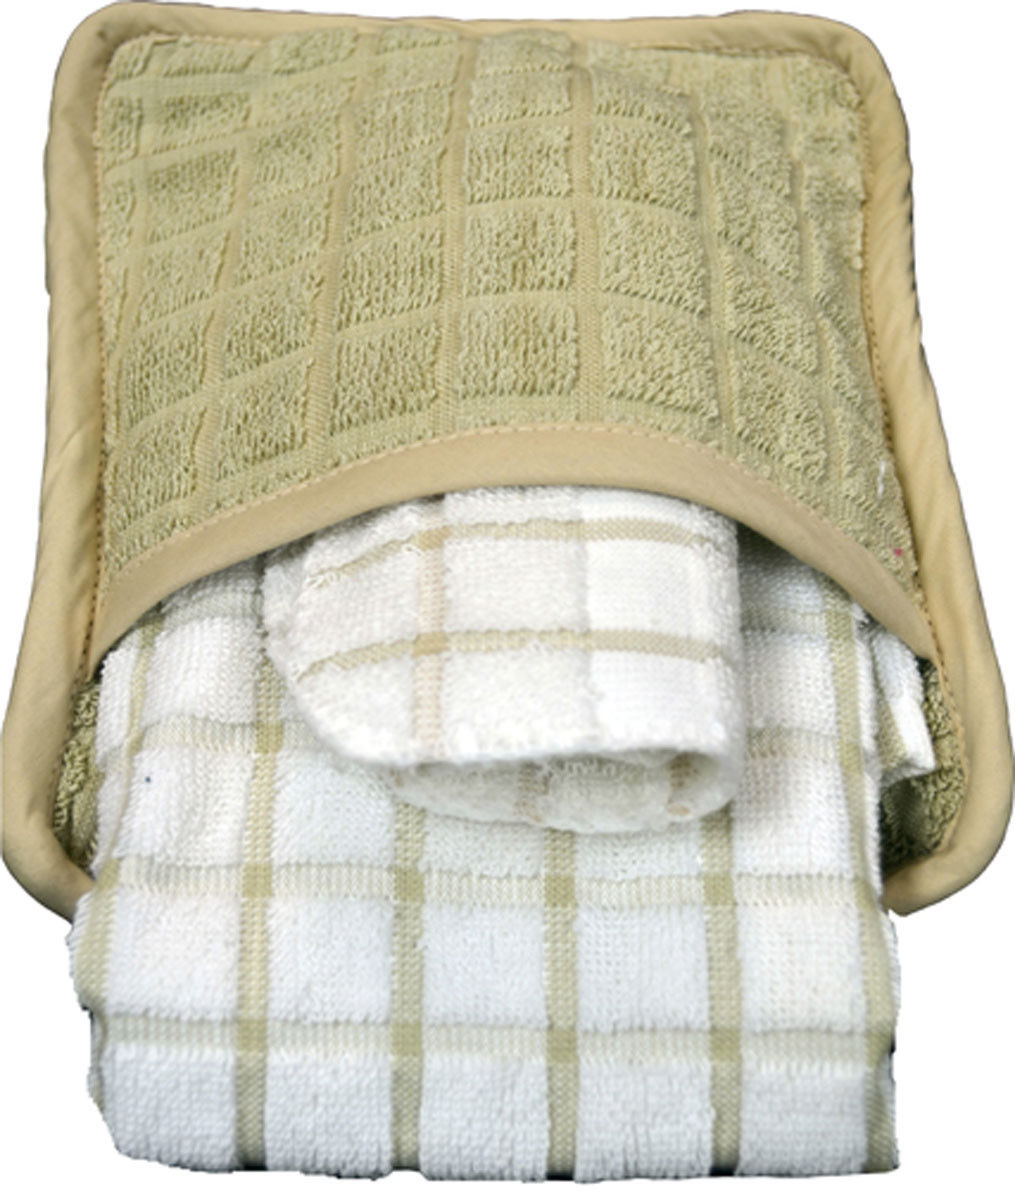 Are these towels suitable for commercial kitchens?